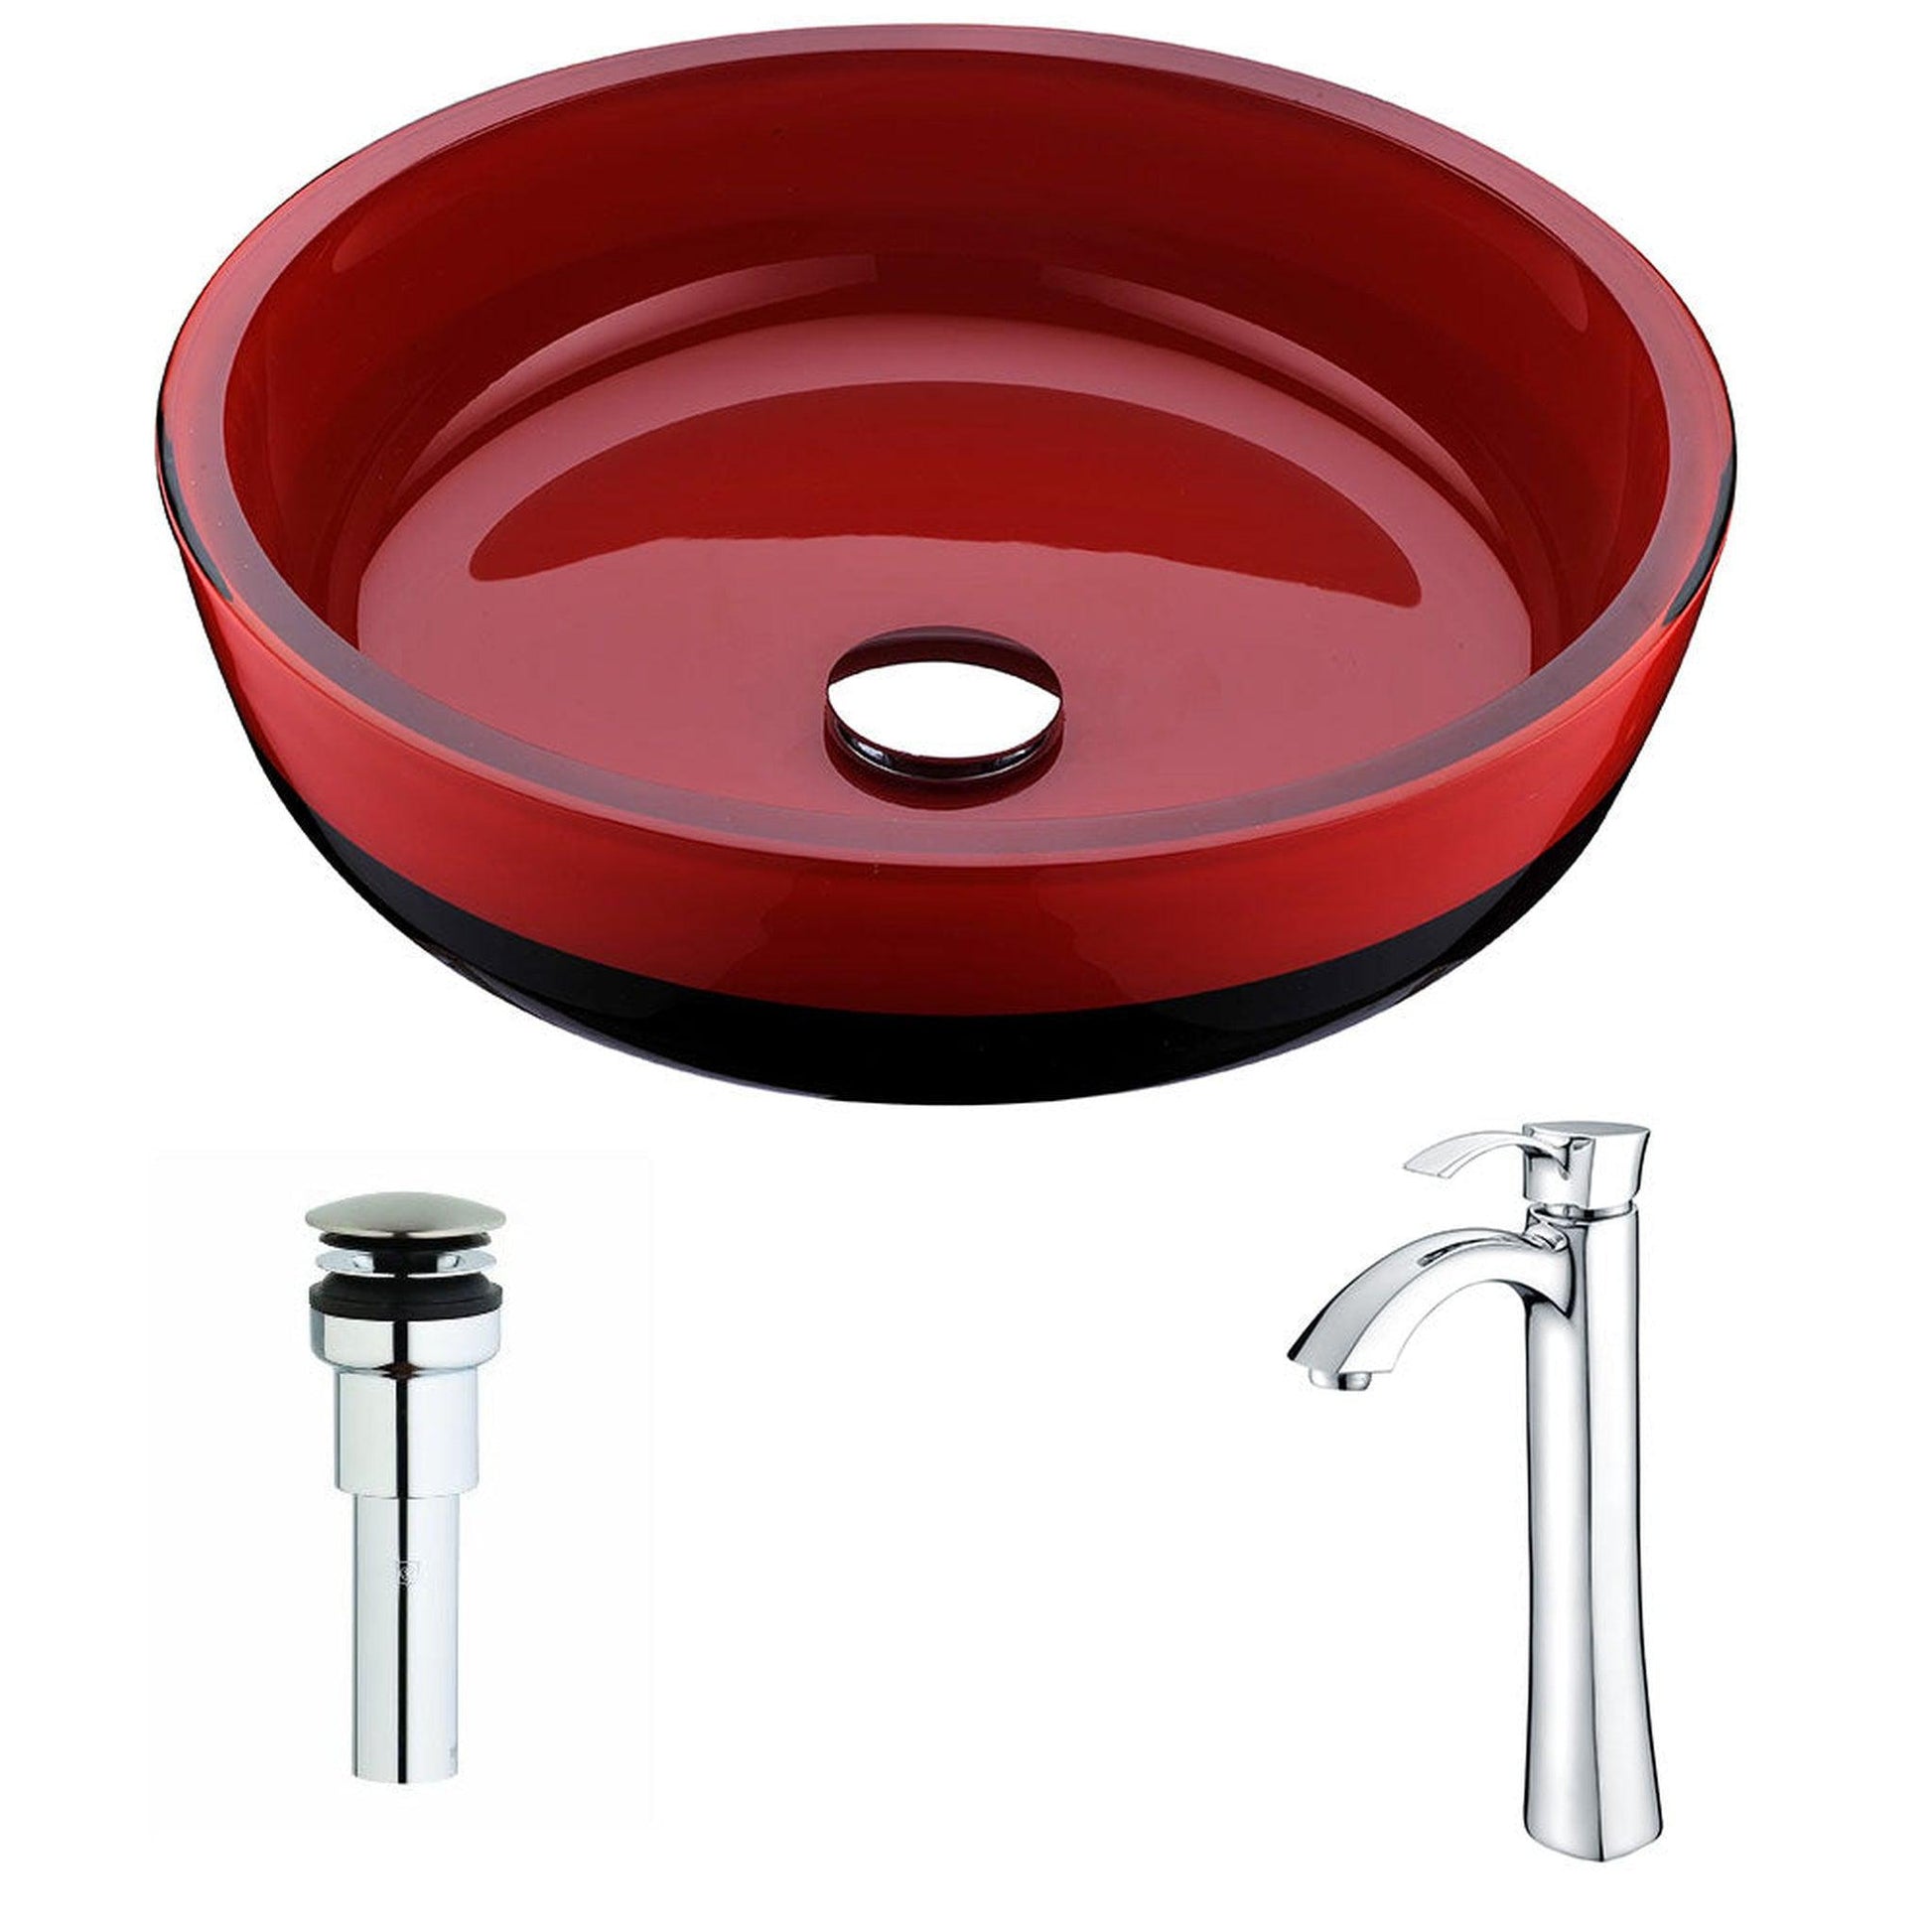 ANZZI Schnell Series 17" x 17" Cylinder Shape Lustrous Red and Black Deco-Glass Vessel Sink With Chrome Pop-Up Drain and Harmony Faucet